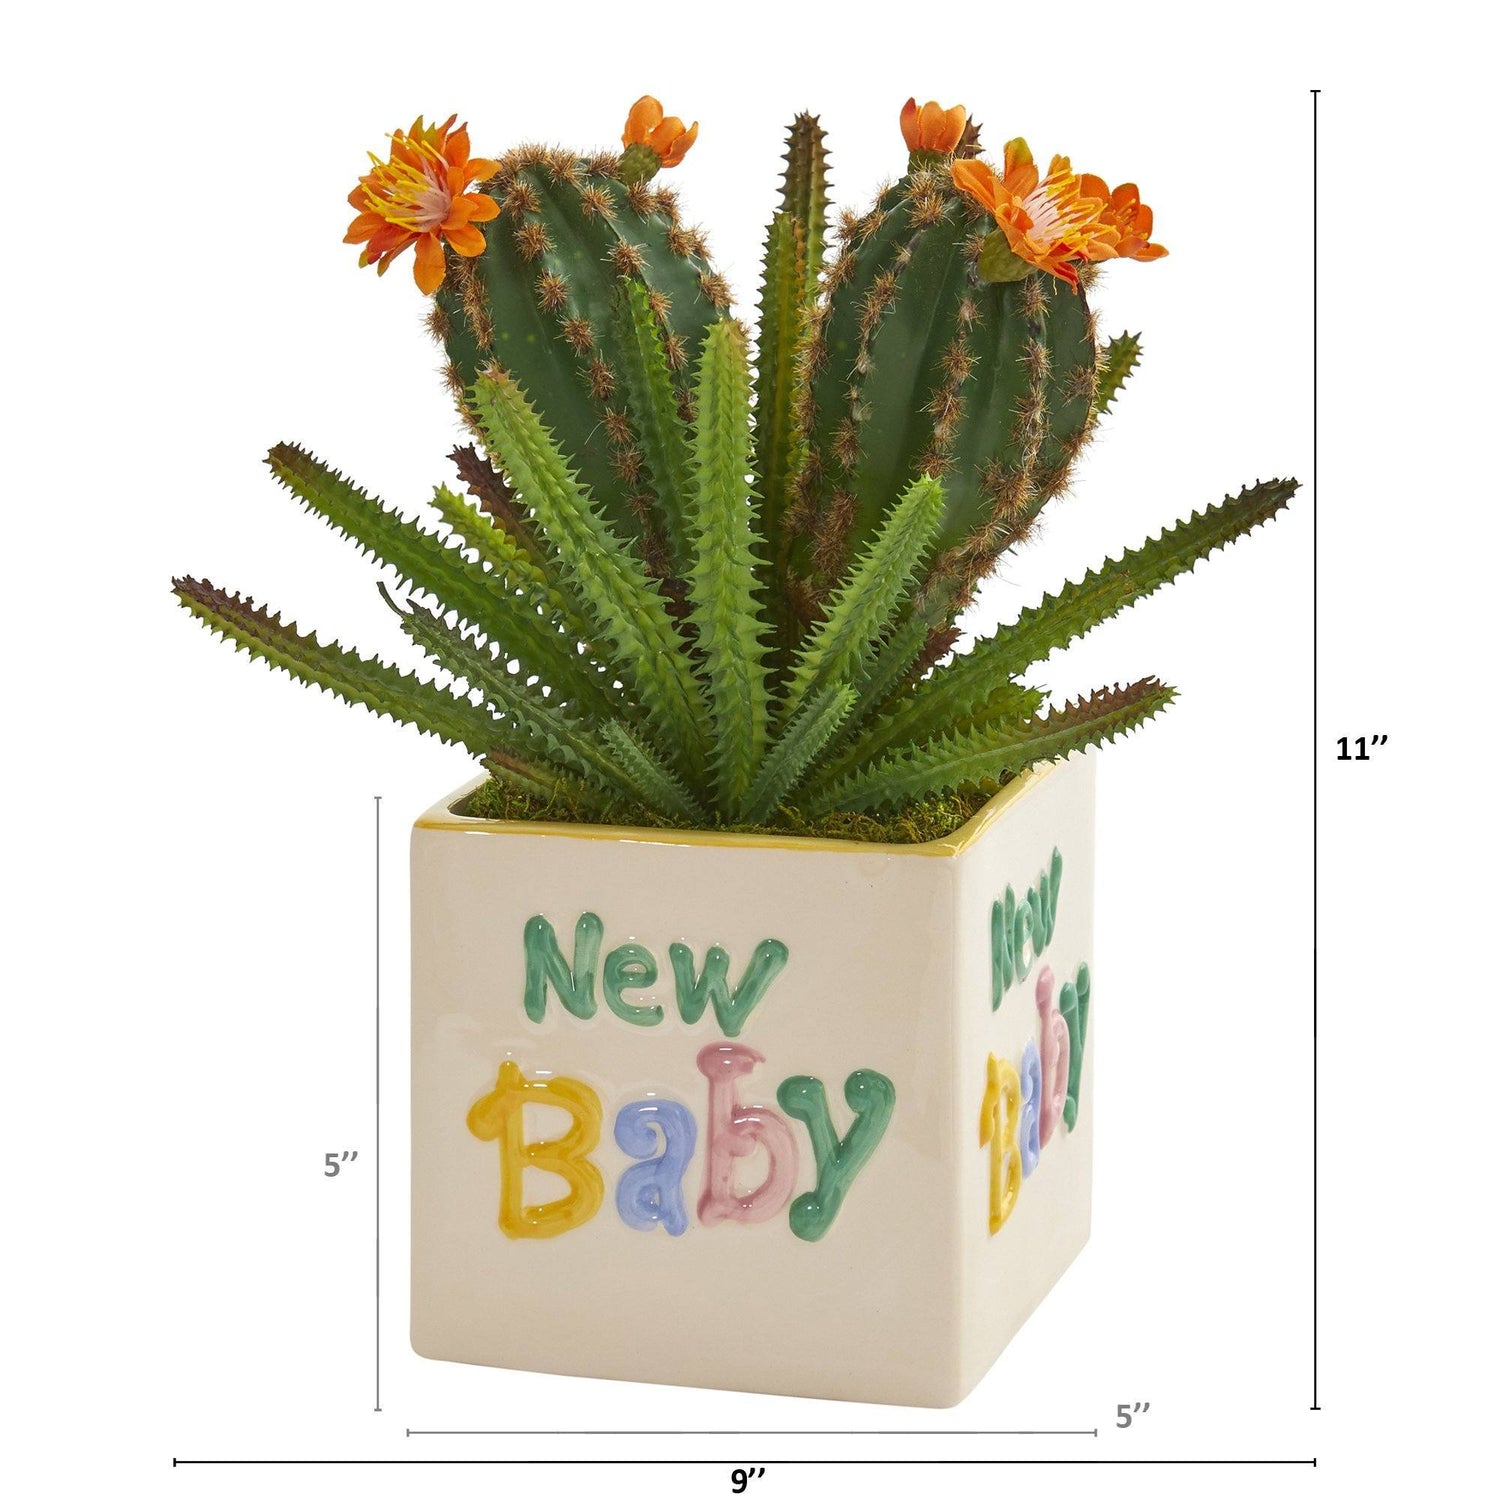 11” Cactus Succulent Artificial Plant in “New Baby” Planter